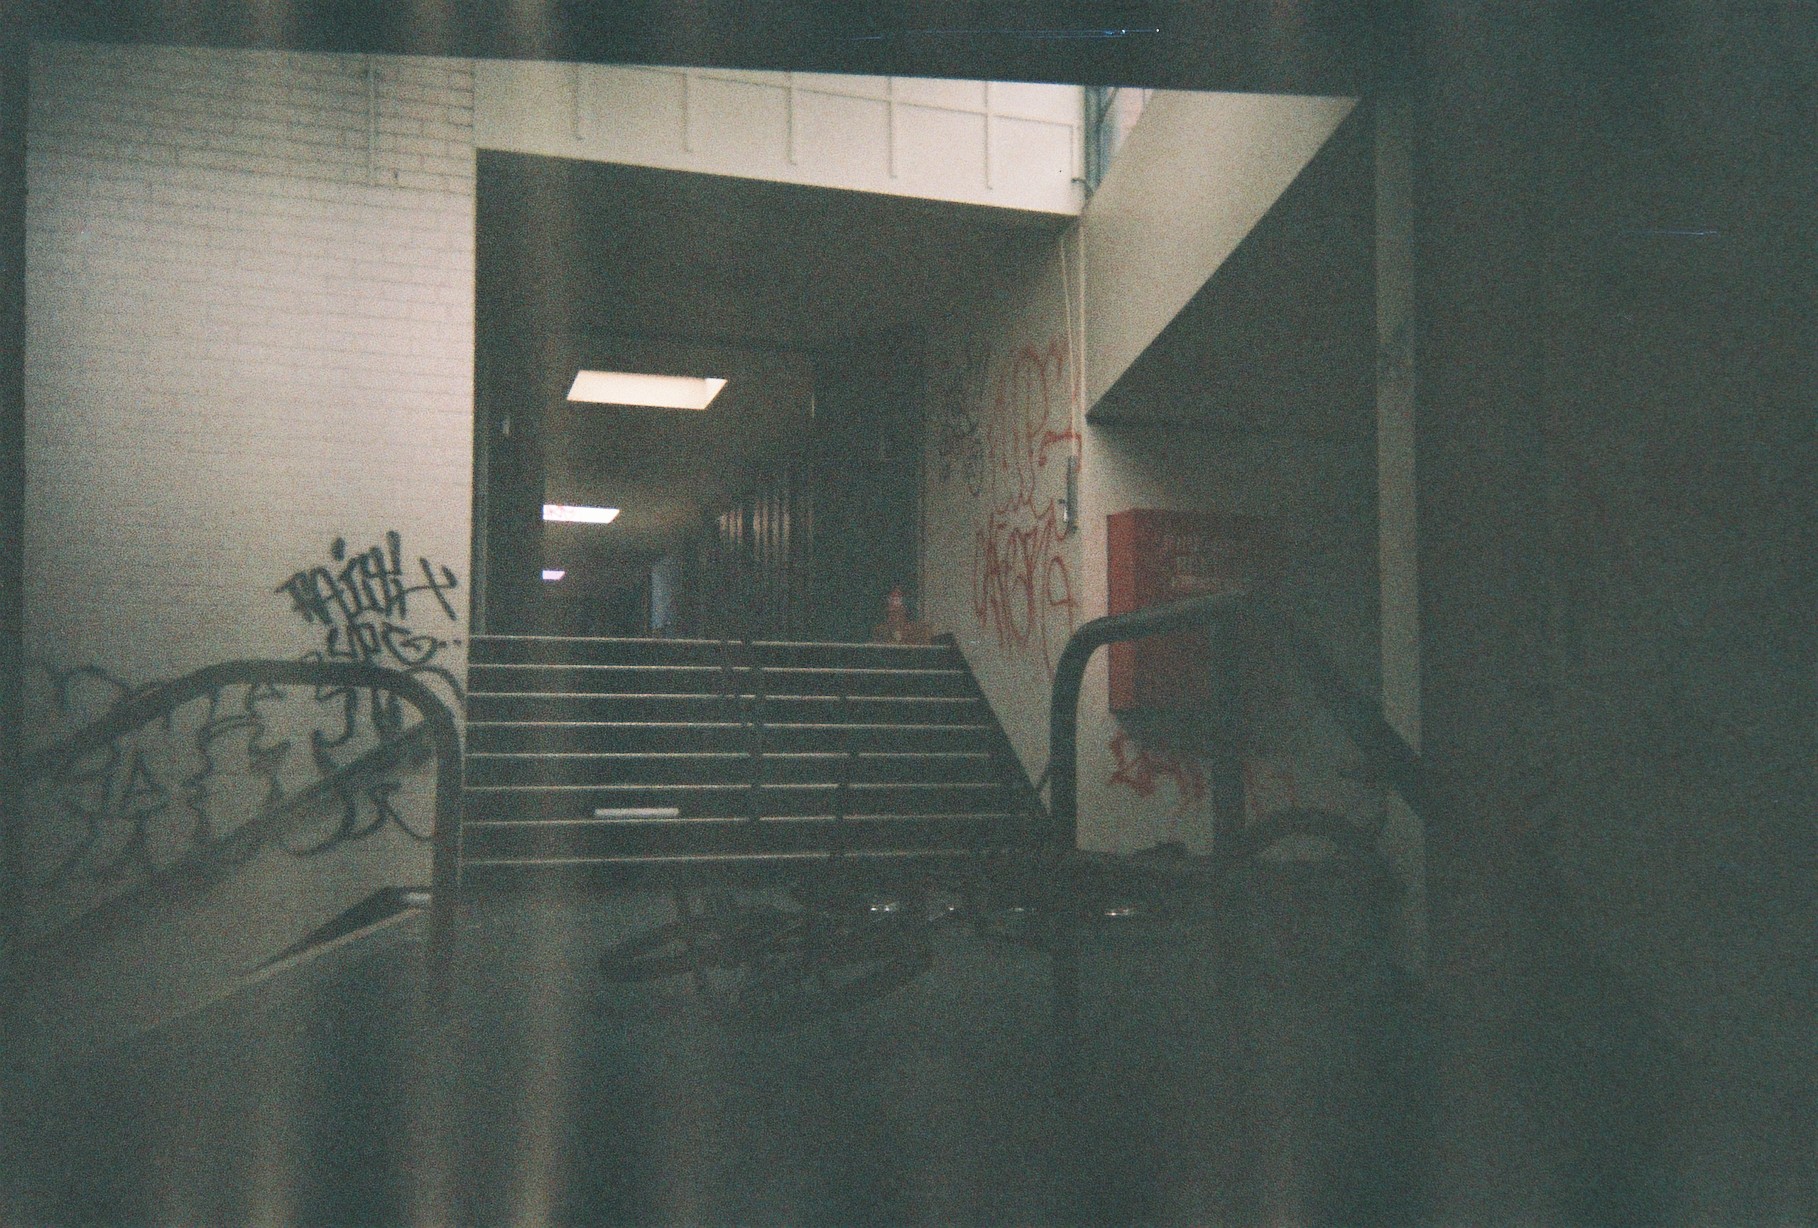 Abandoned School that Melbourne local Matty G gave us the details of to hit this rail.